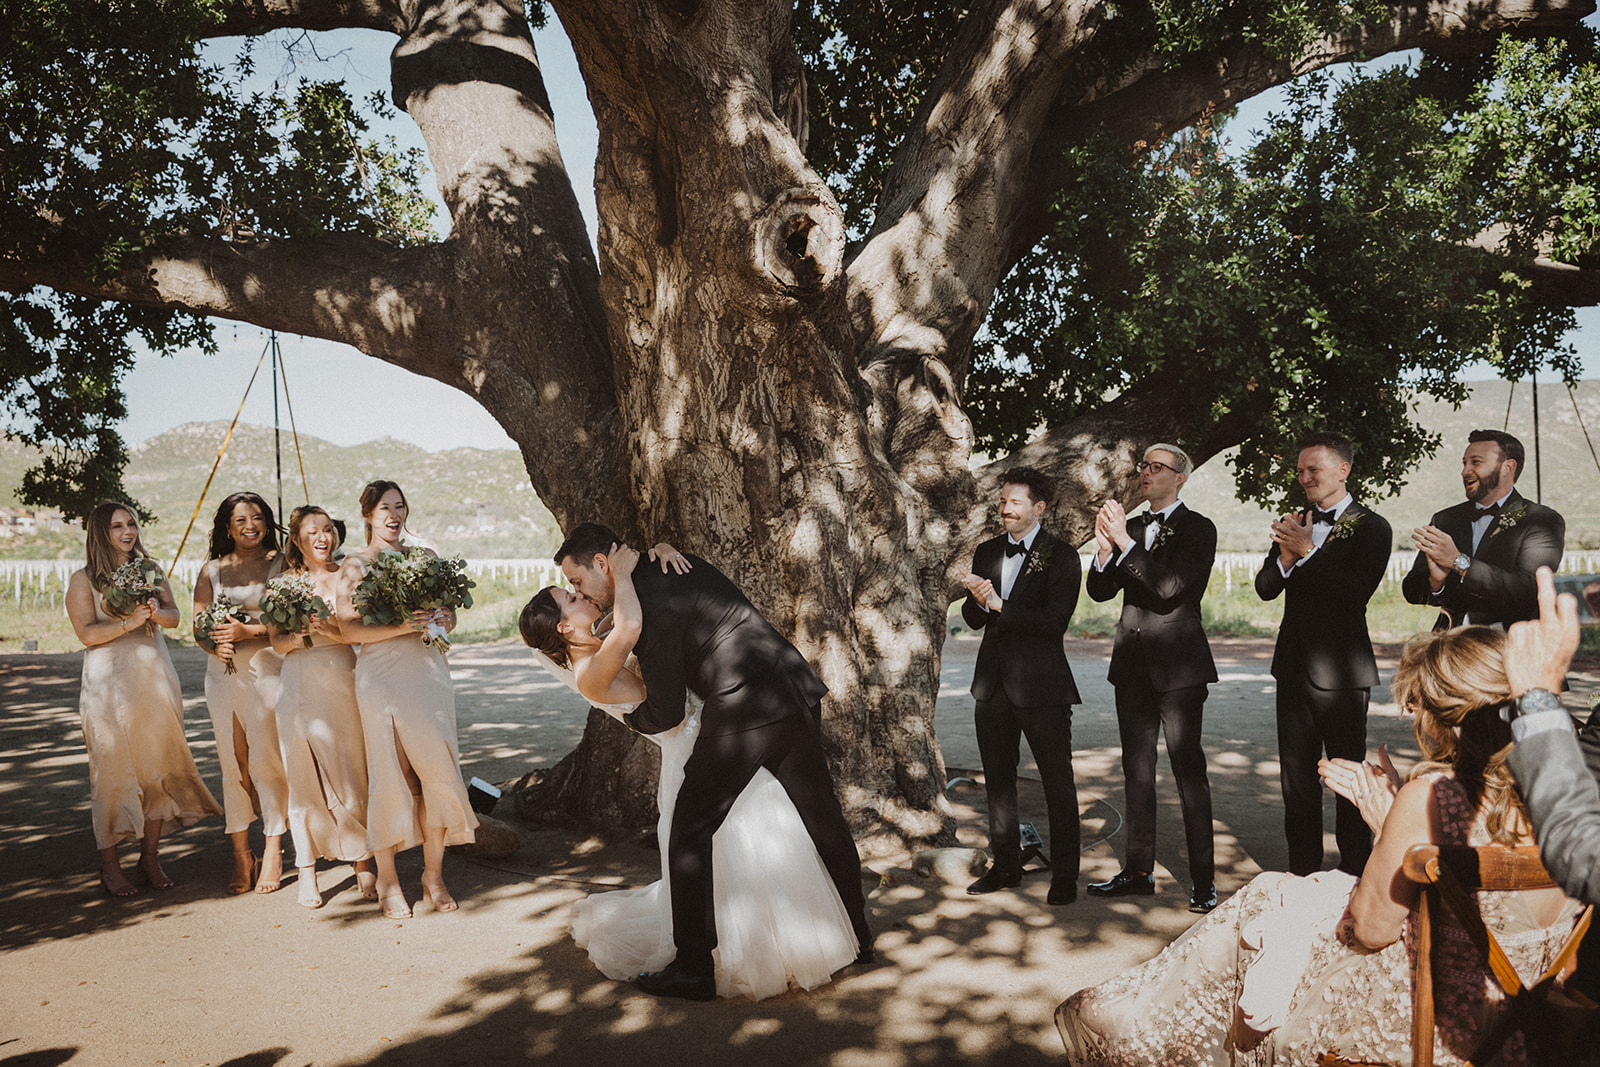 Bride and groom's first kiss in Mexico